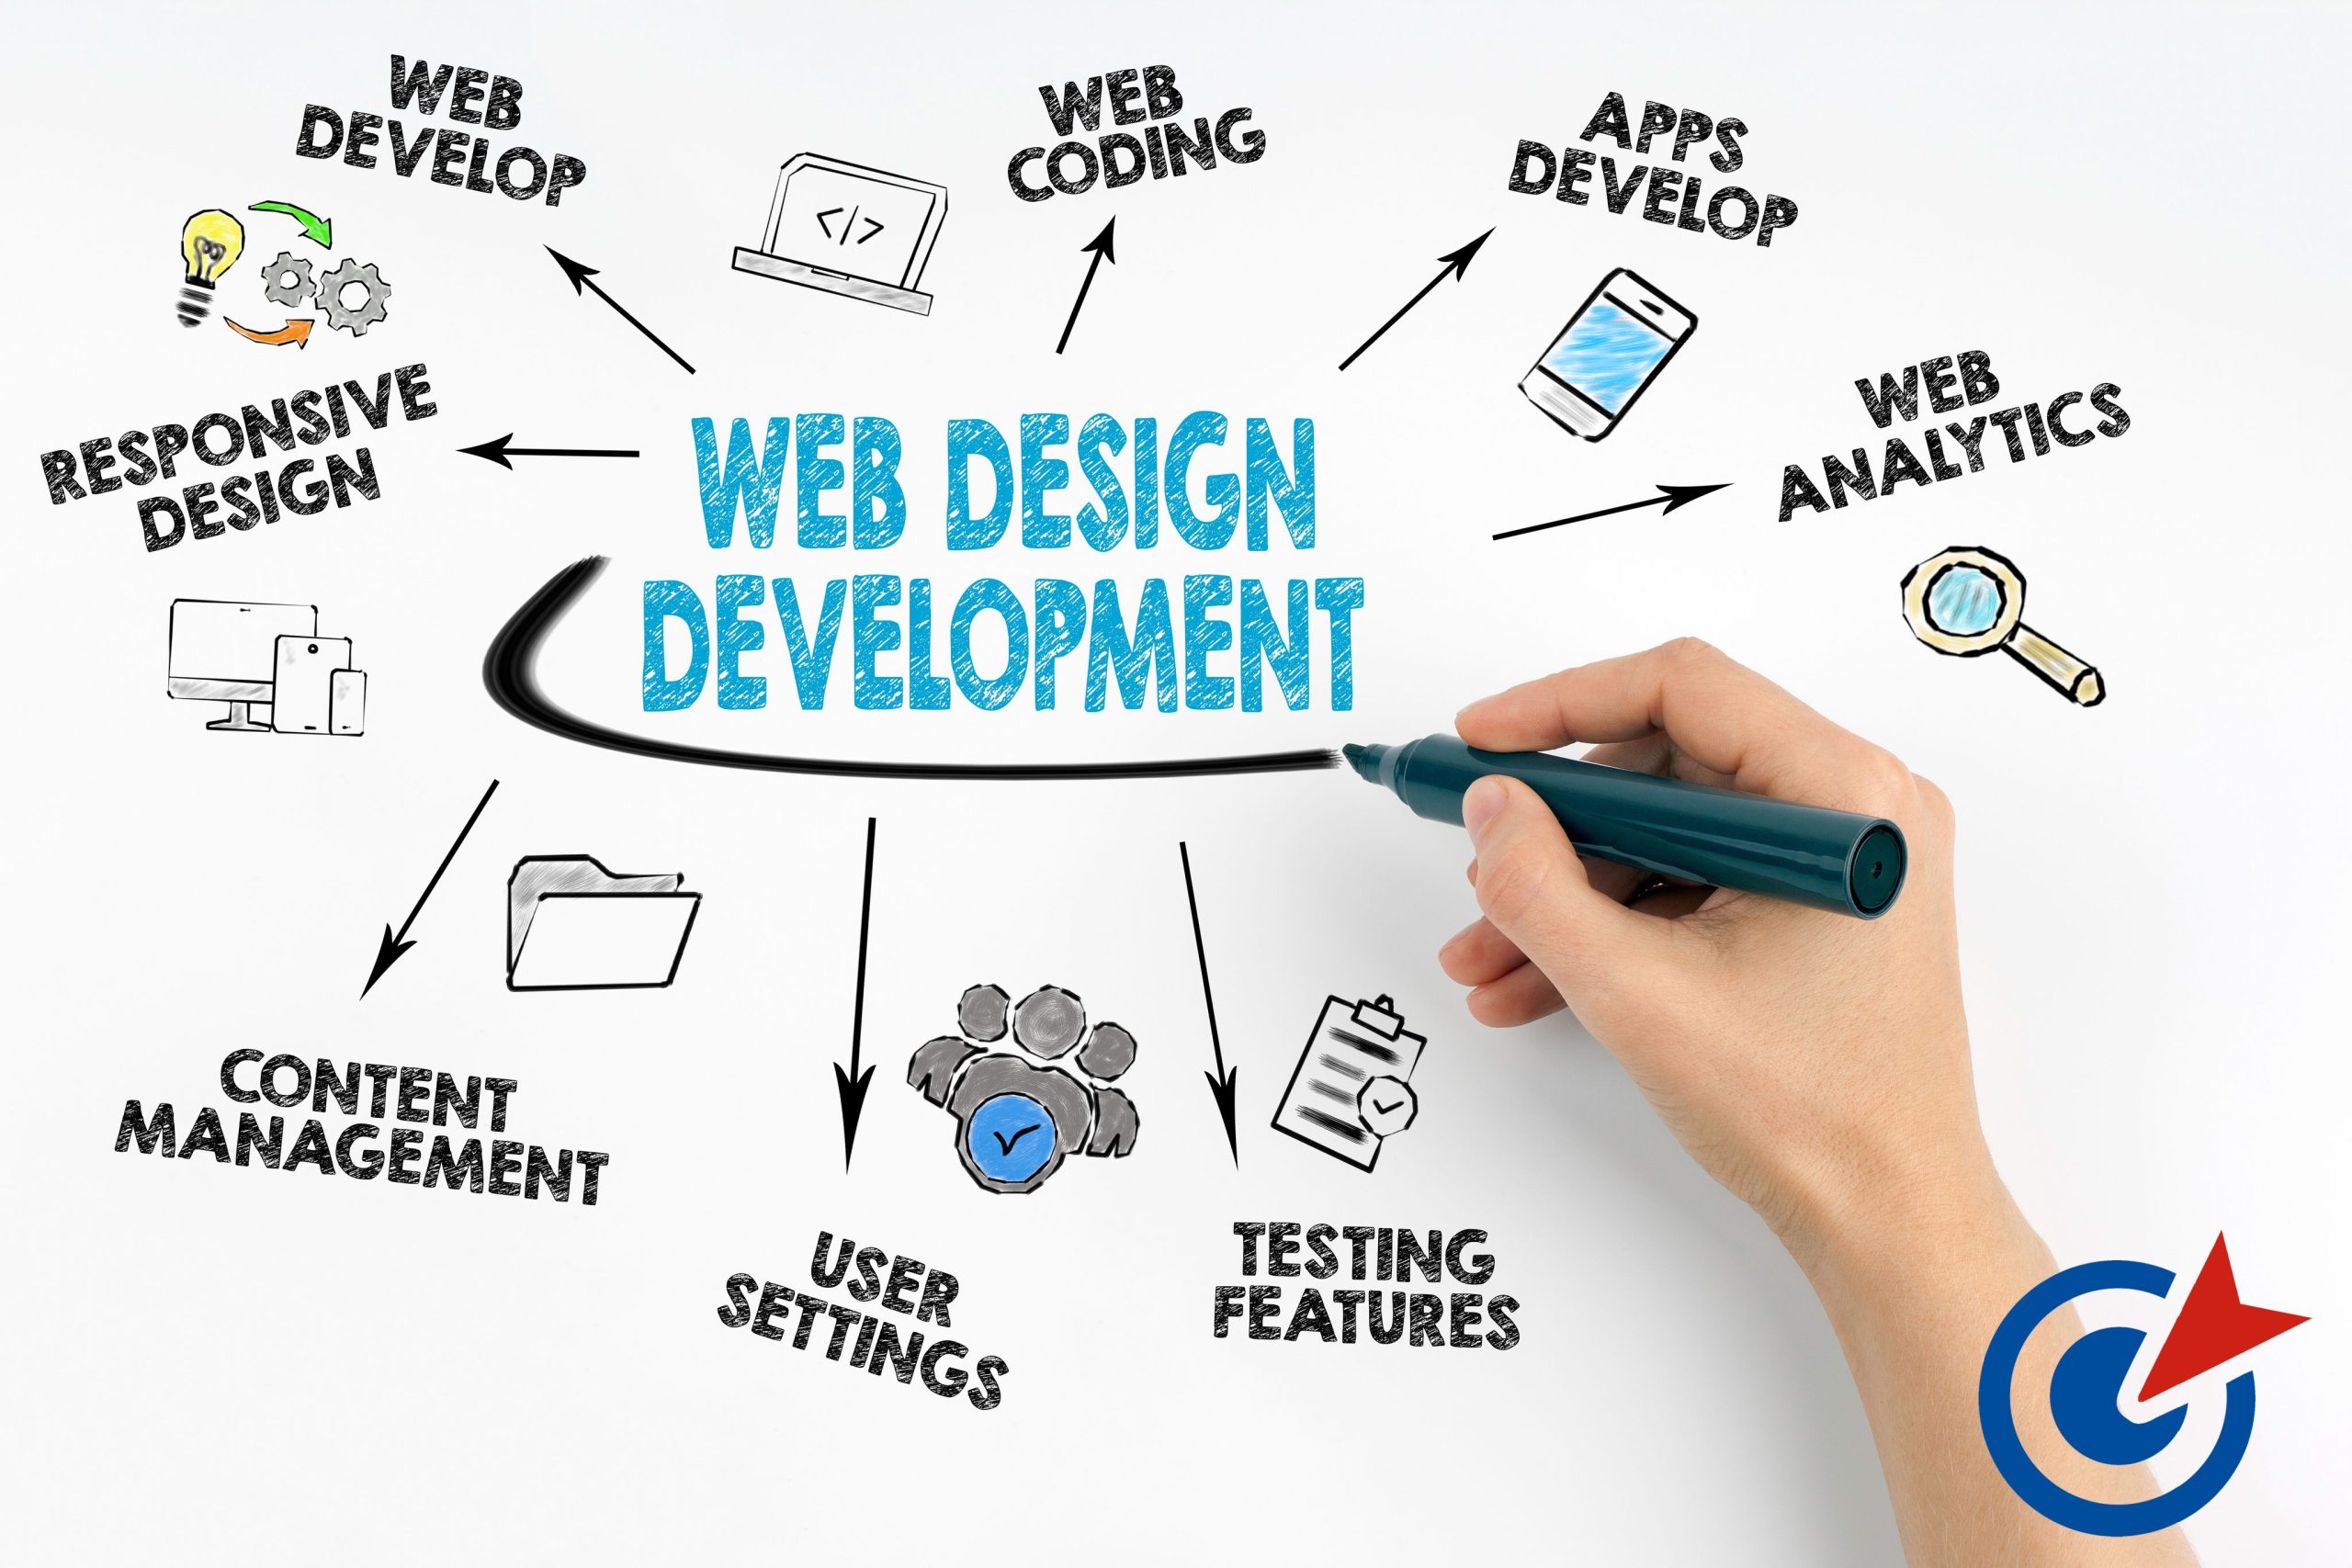 Why Not Get Ahead With Help From Web Design Professionals?